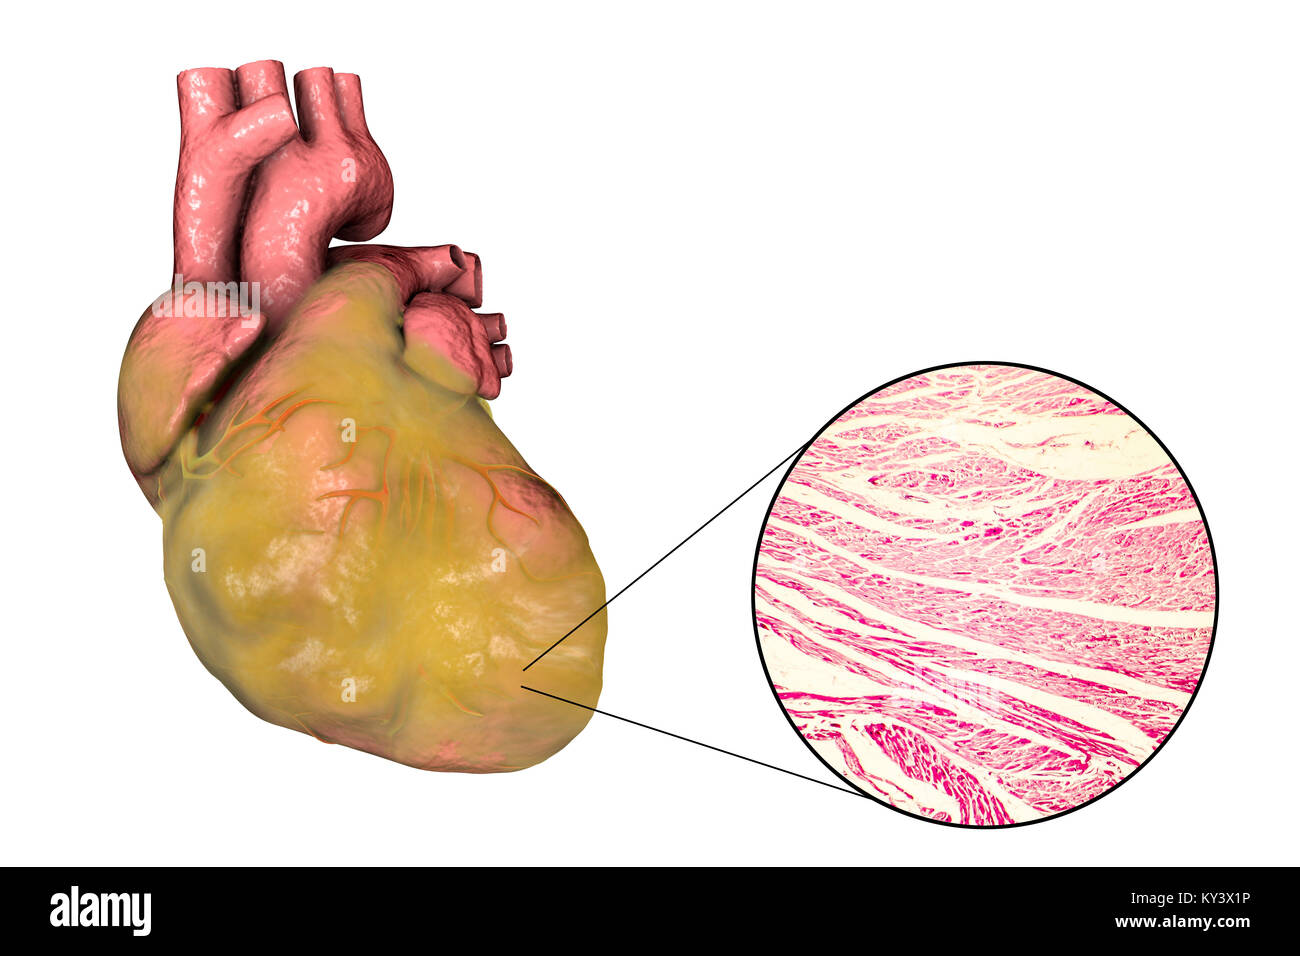 Illustration of a fatty heart with left ventricular hypertrophy and light micrograph of hypertrophic cardiac tissue. Stock Photo